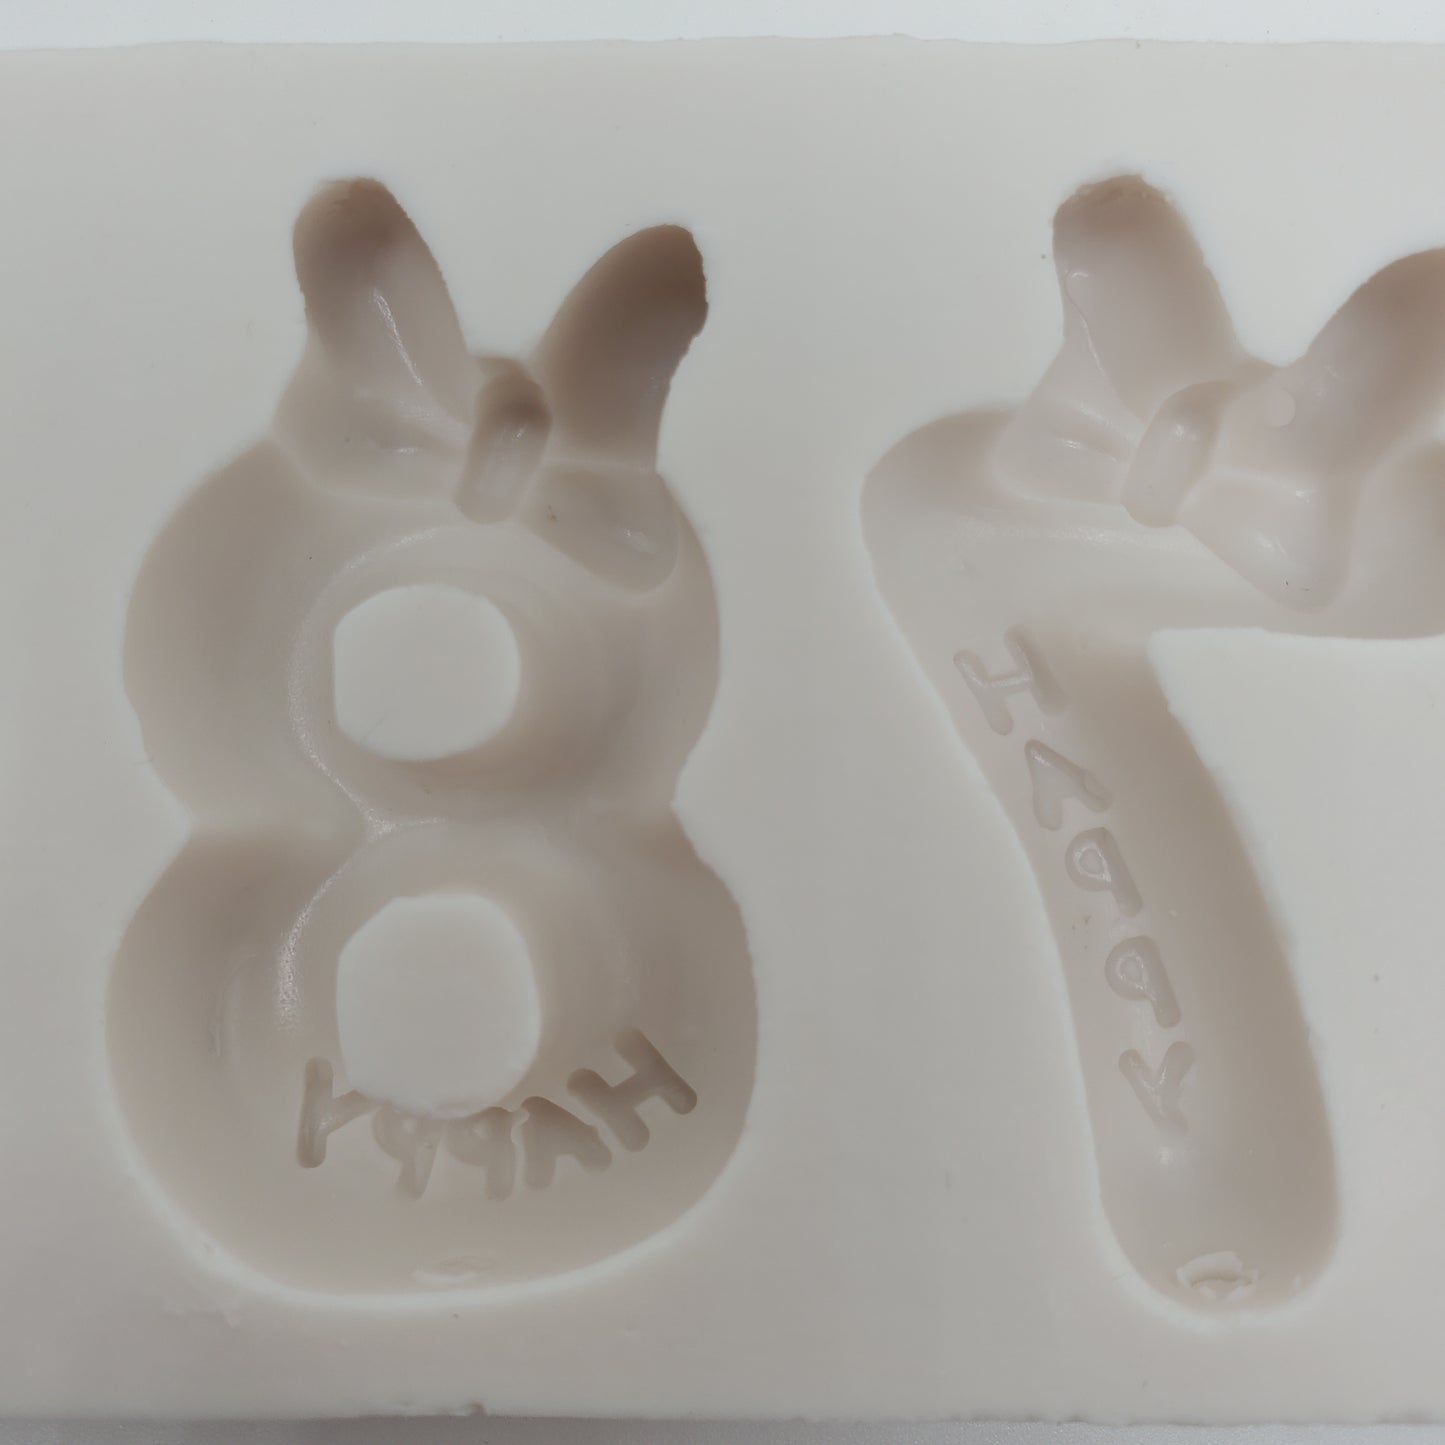 Minnie-inspired silicone mold